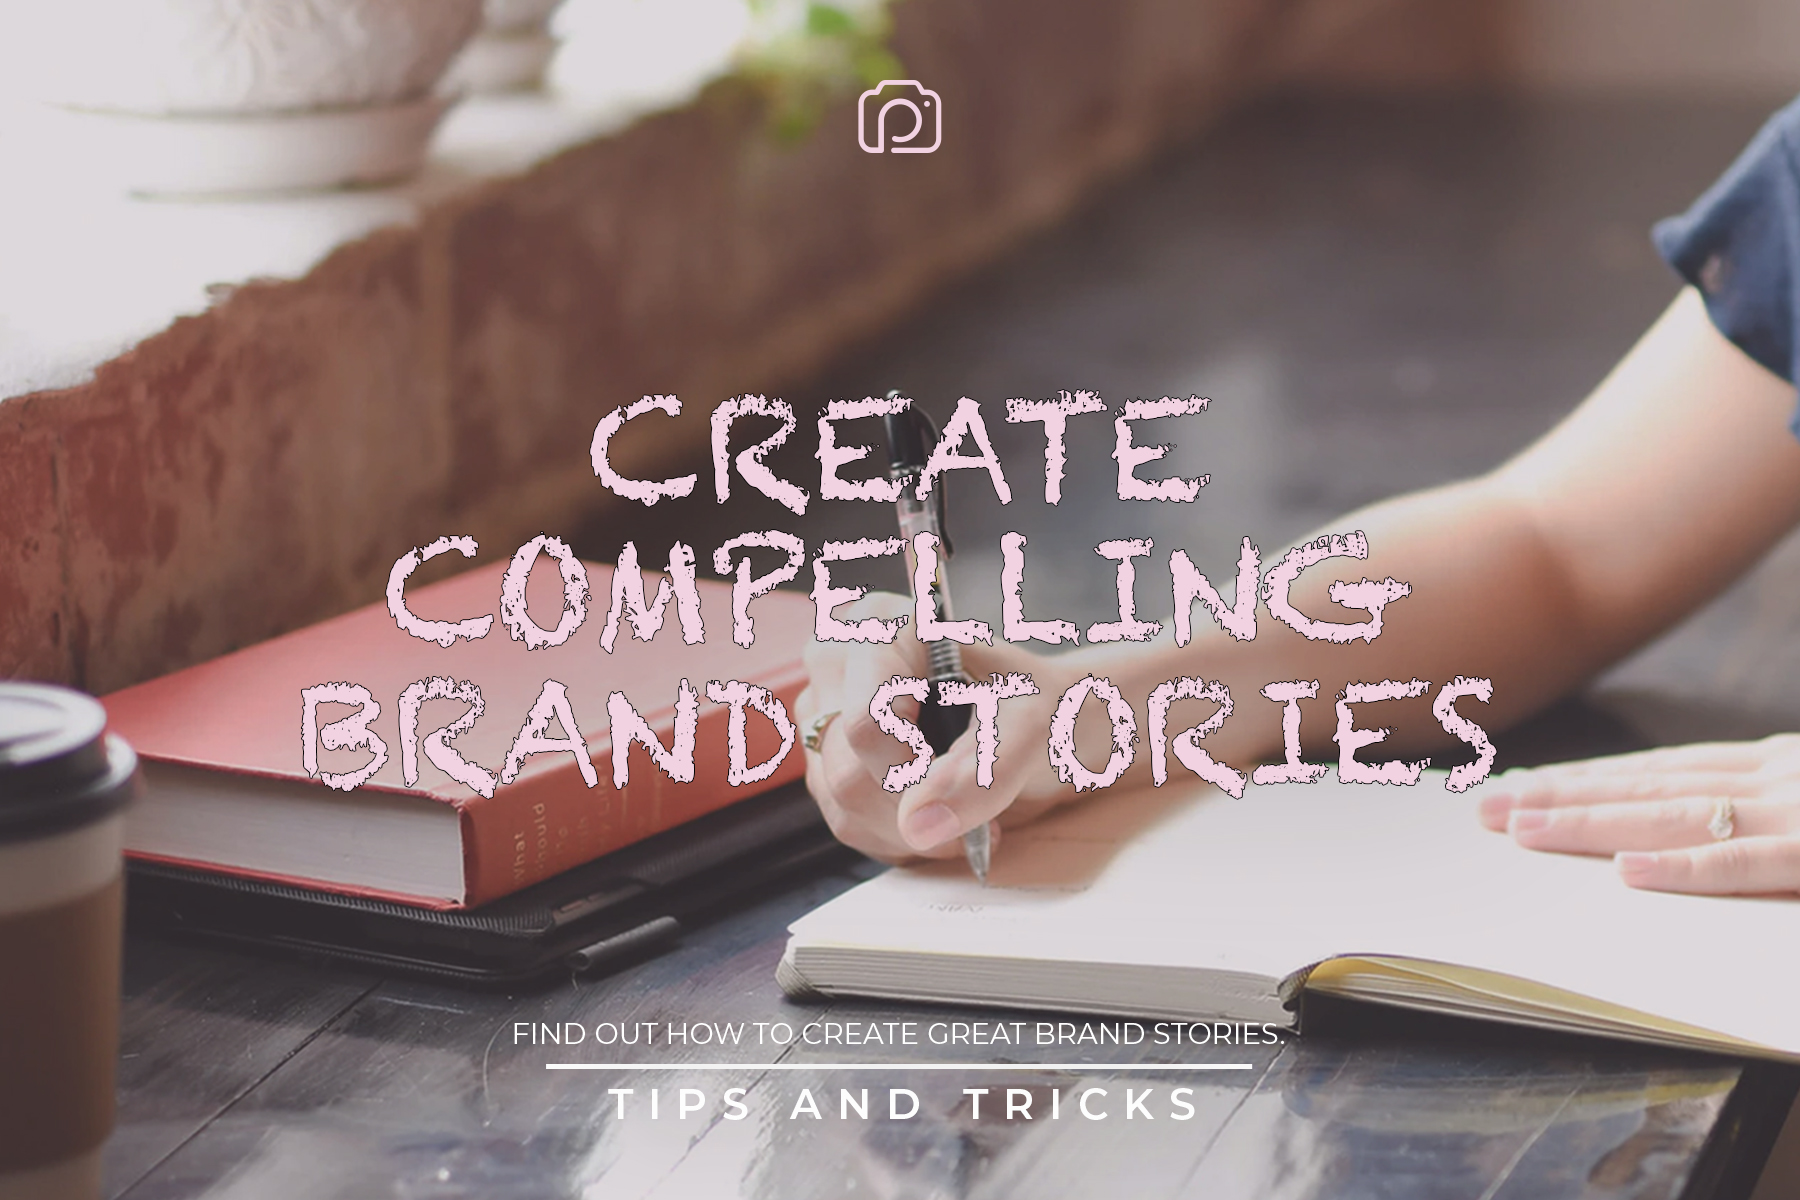 How to create compelling brand stories